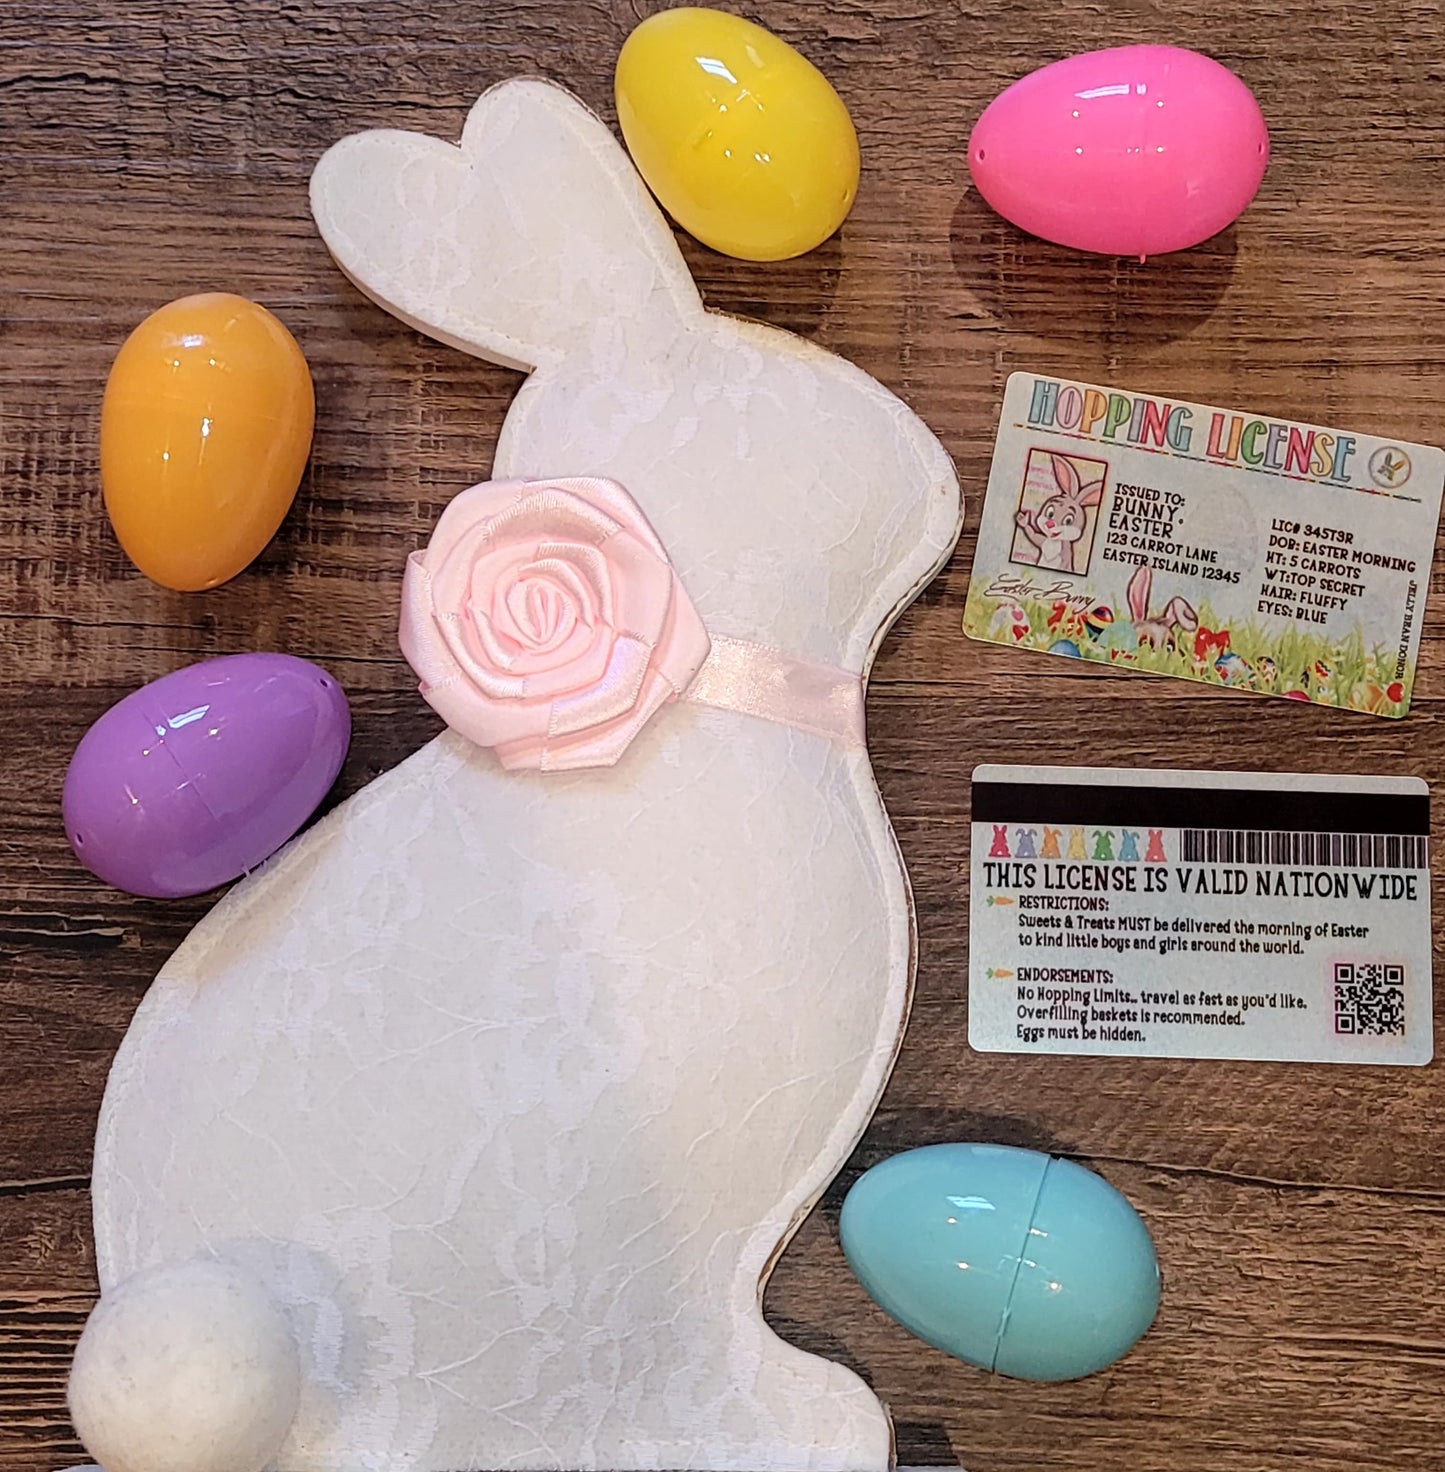 Easter Bunny License